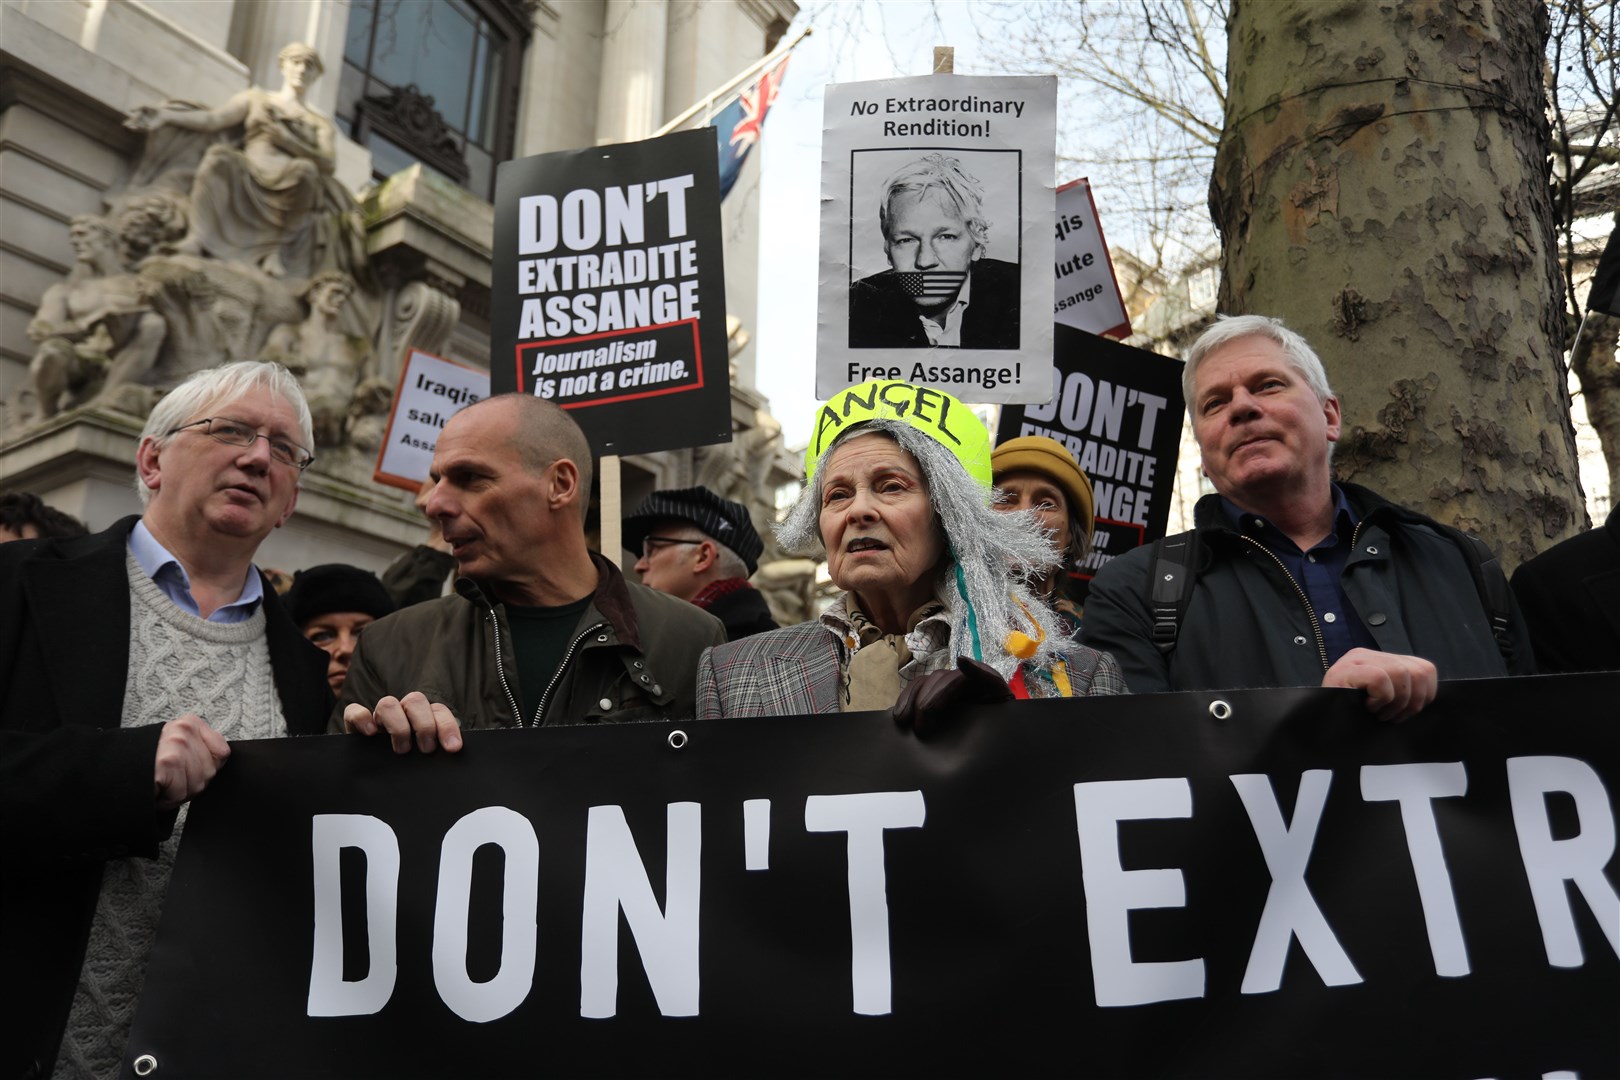 Dame Vivienne Westwood joins a march protesting against Julian Assange’s imprisonment and extradition (PA)